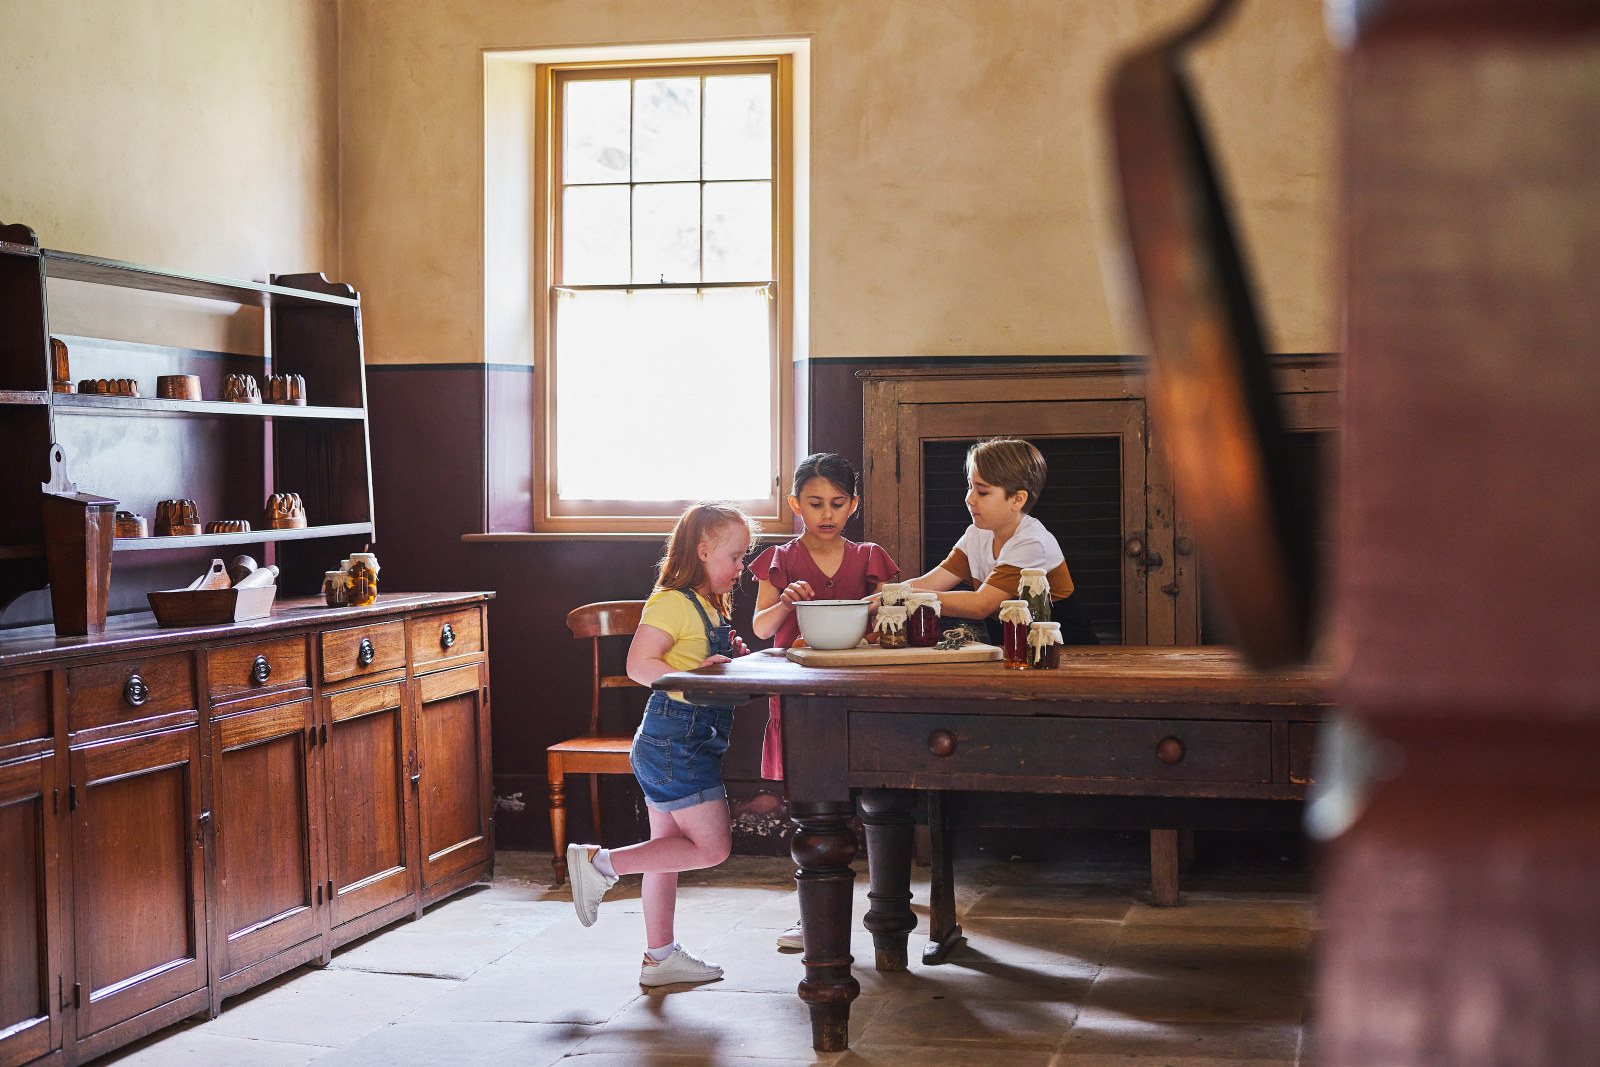 A group of children looking at objects on a table in Vaucluse House Kitchen